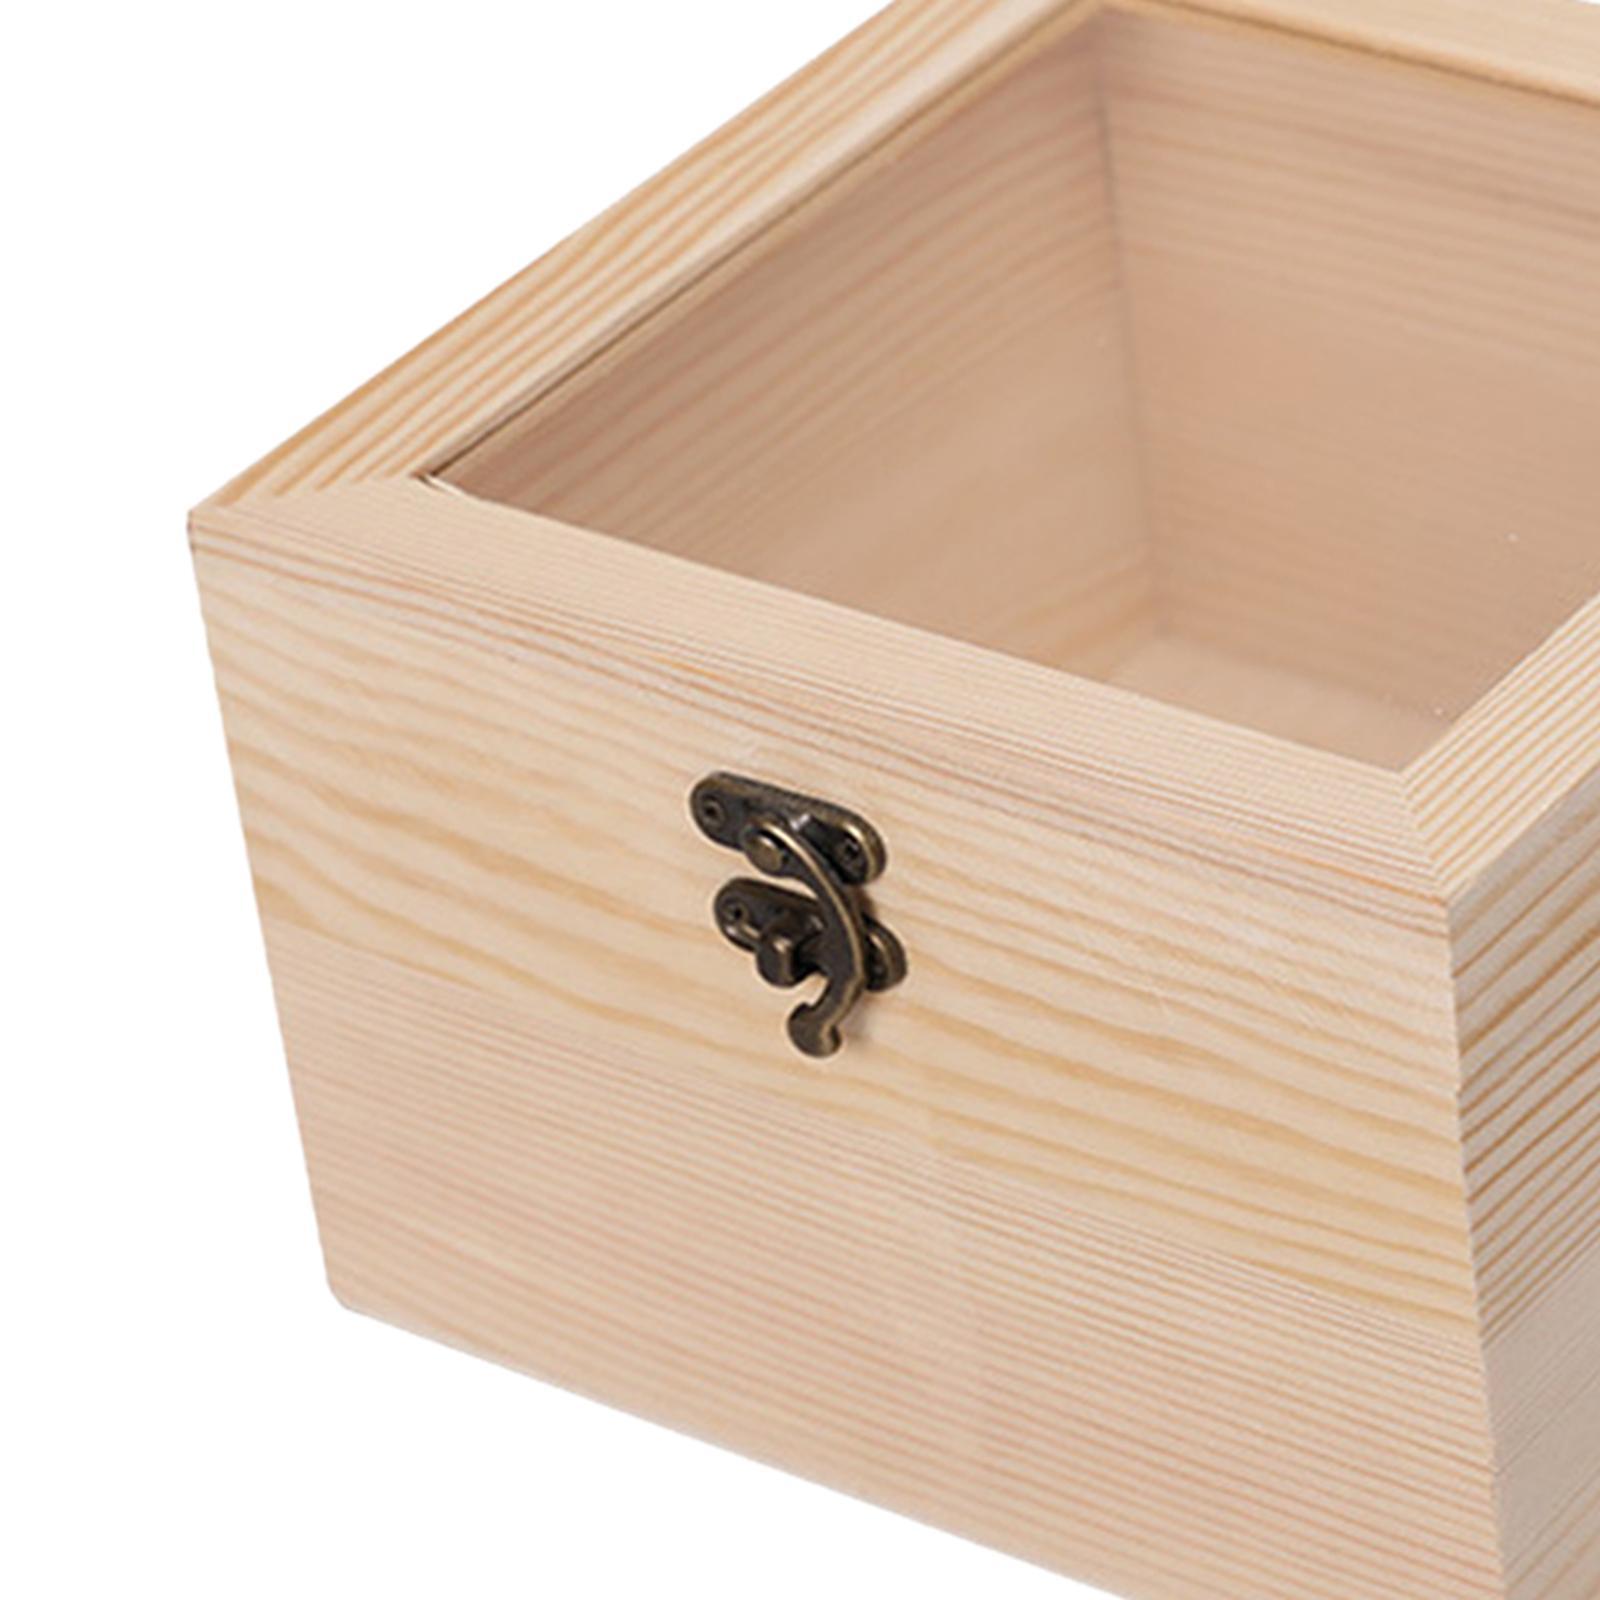 Wooden Box Jewelry Display Case Storage Box with Glass Lid